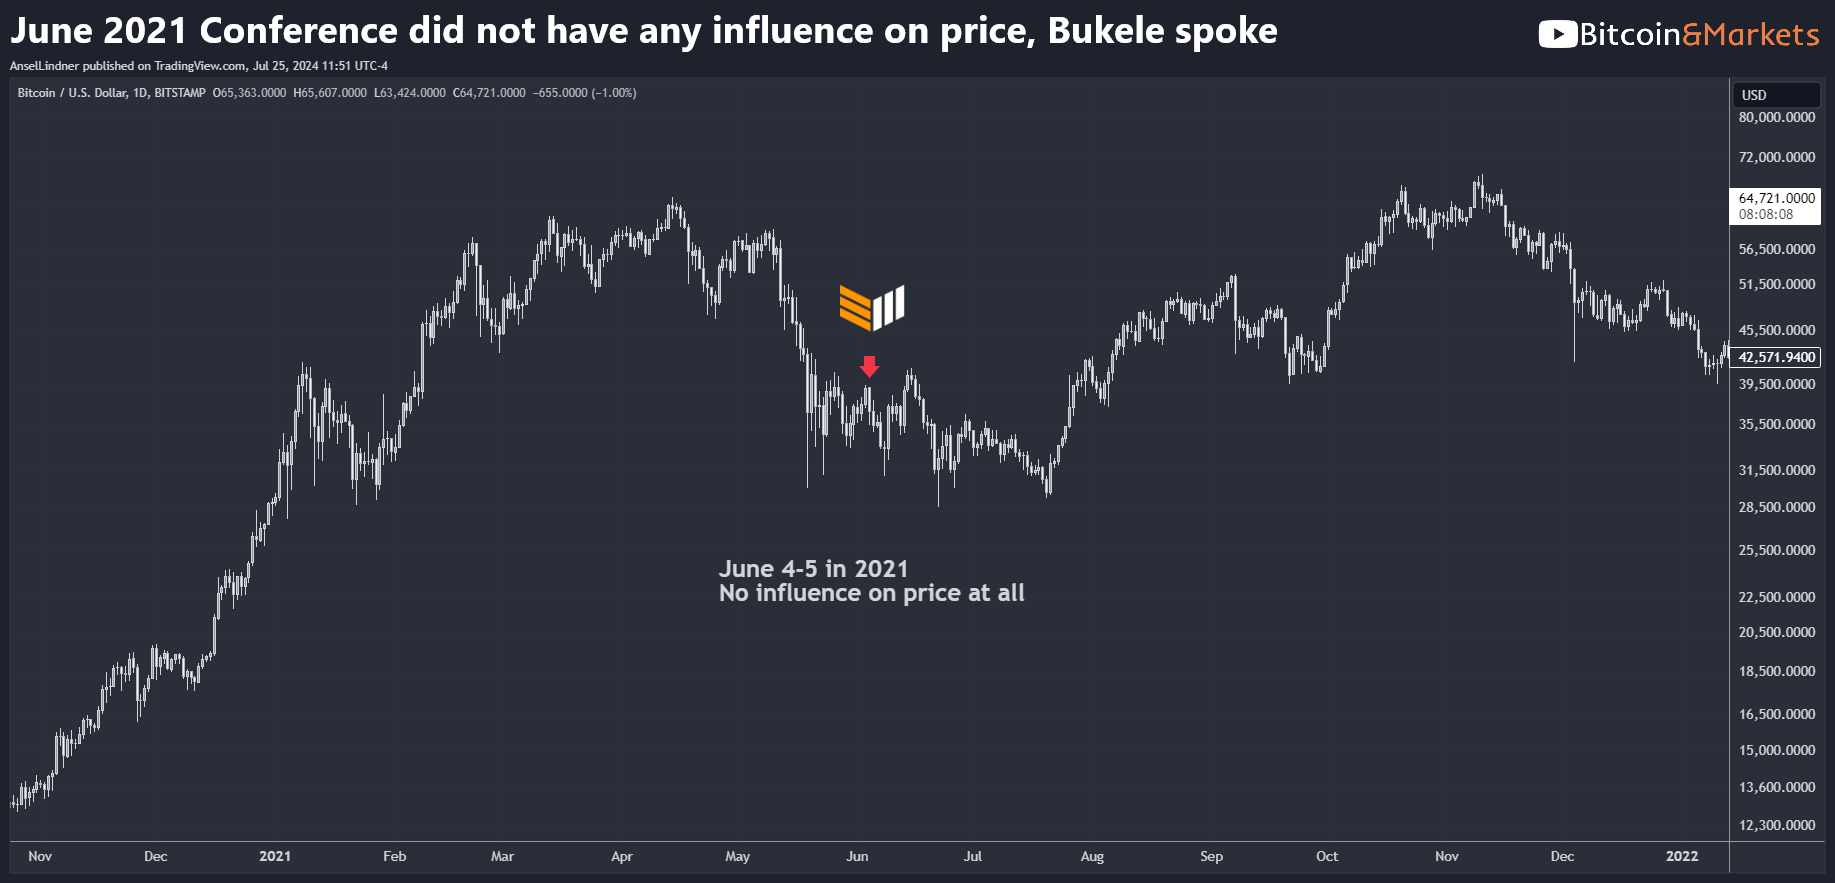 Bitcoin Minute: Historical Price Performance During Bitcoin Conferences